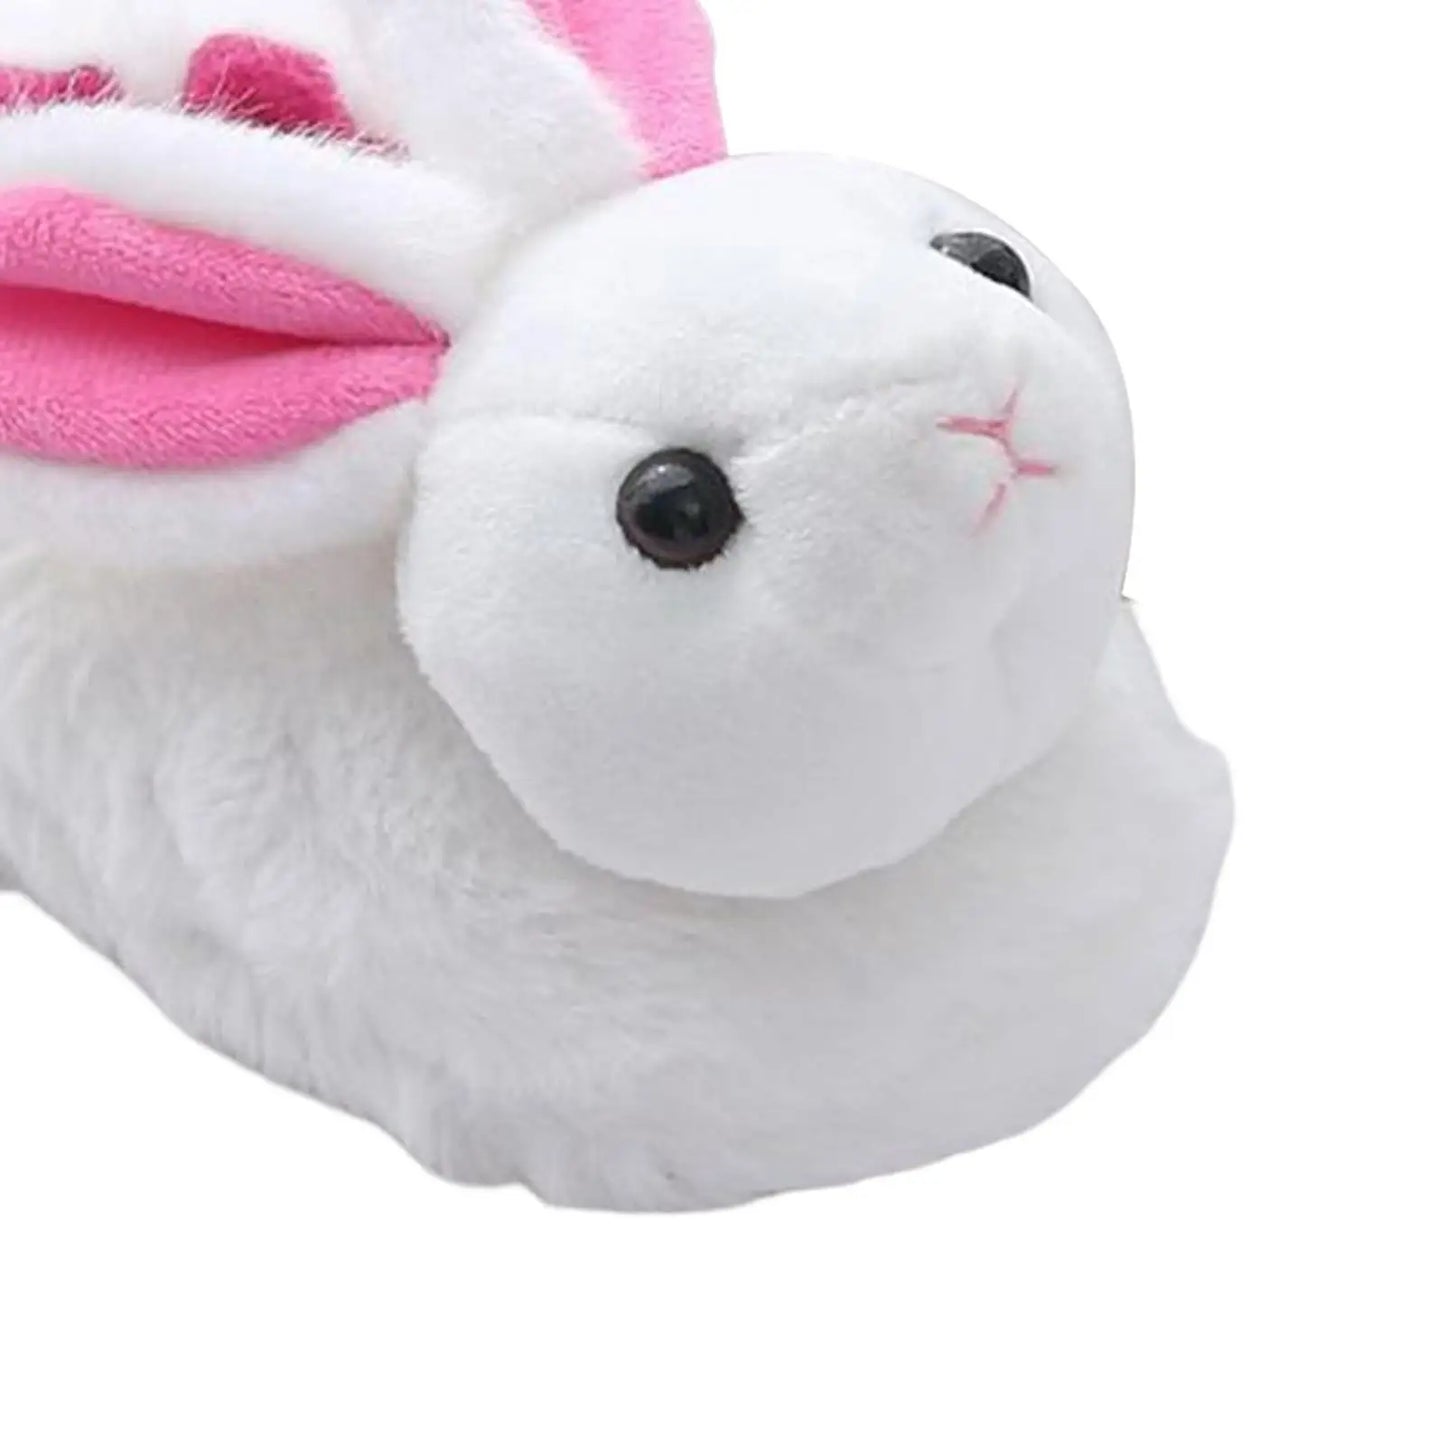 White Rabbit Slippers with Pink Ears for Girls